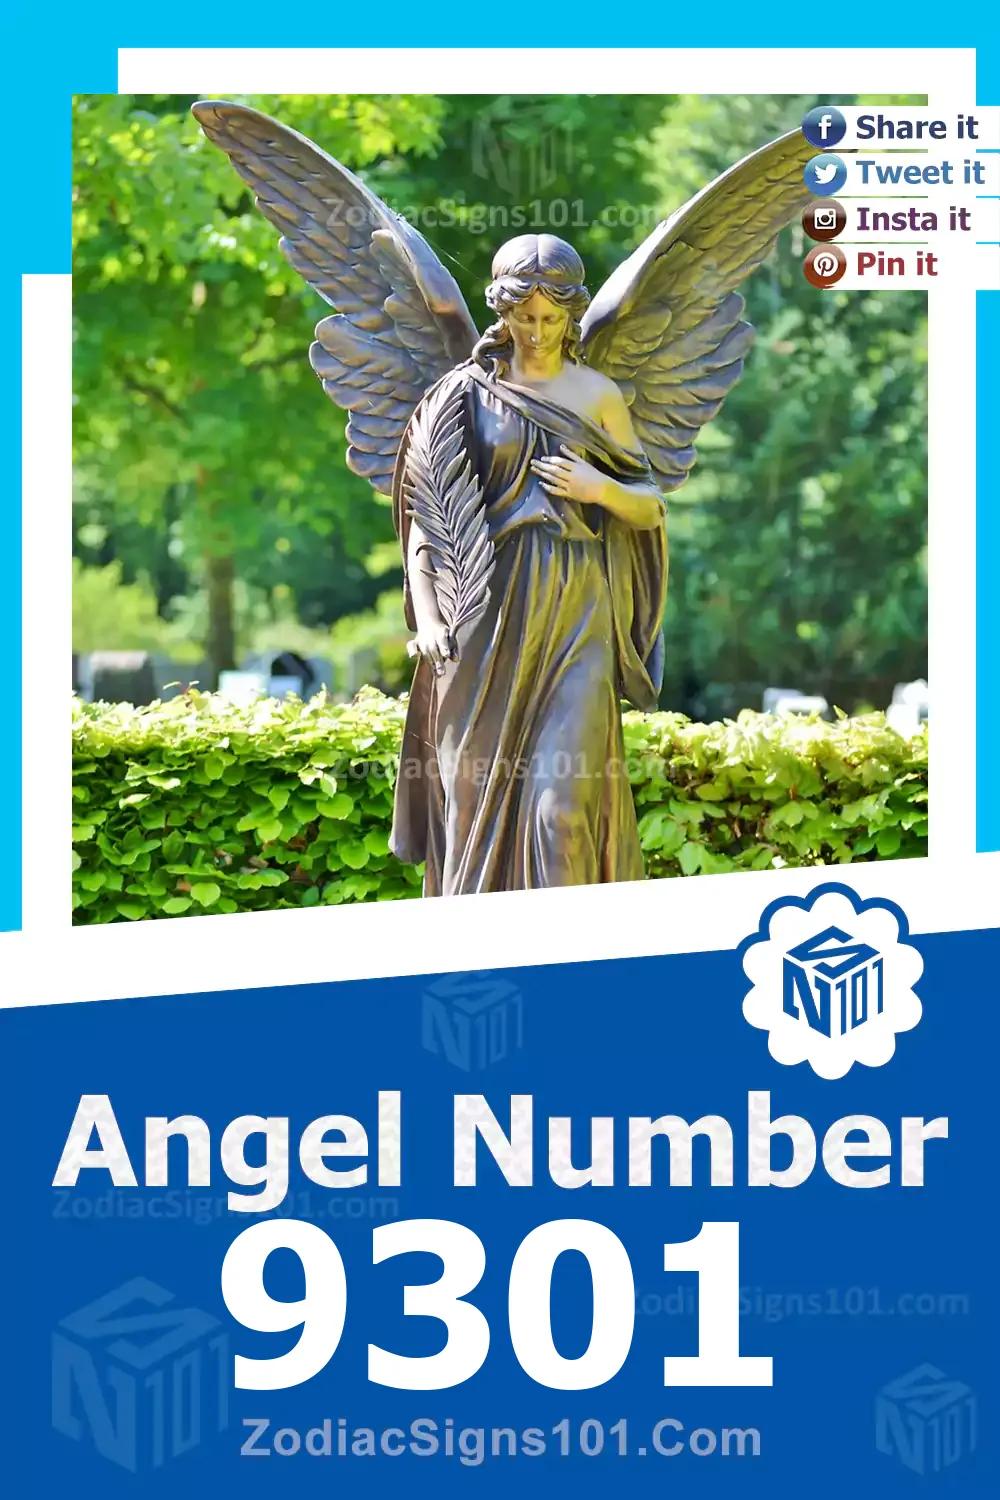 9301 Angel Number Meaning